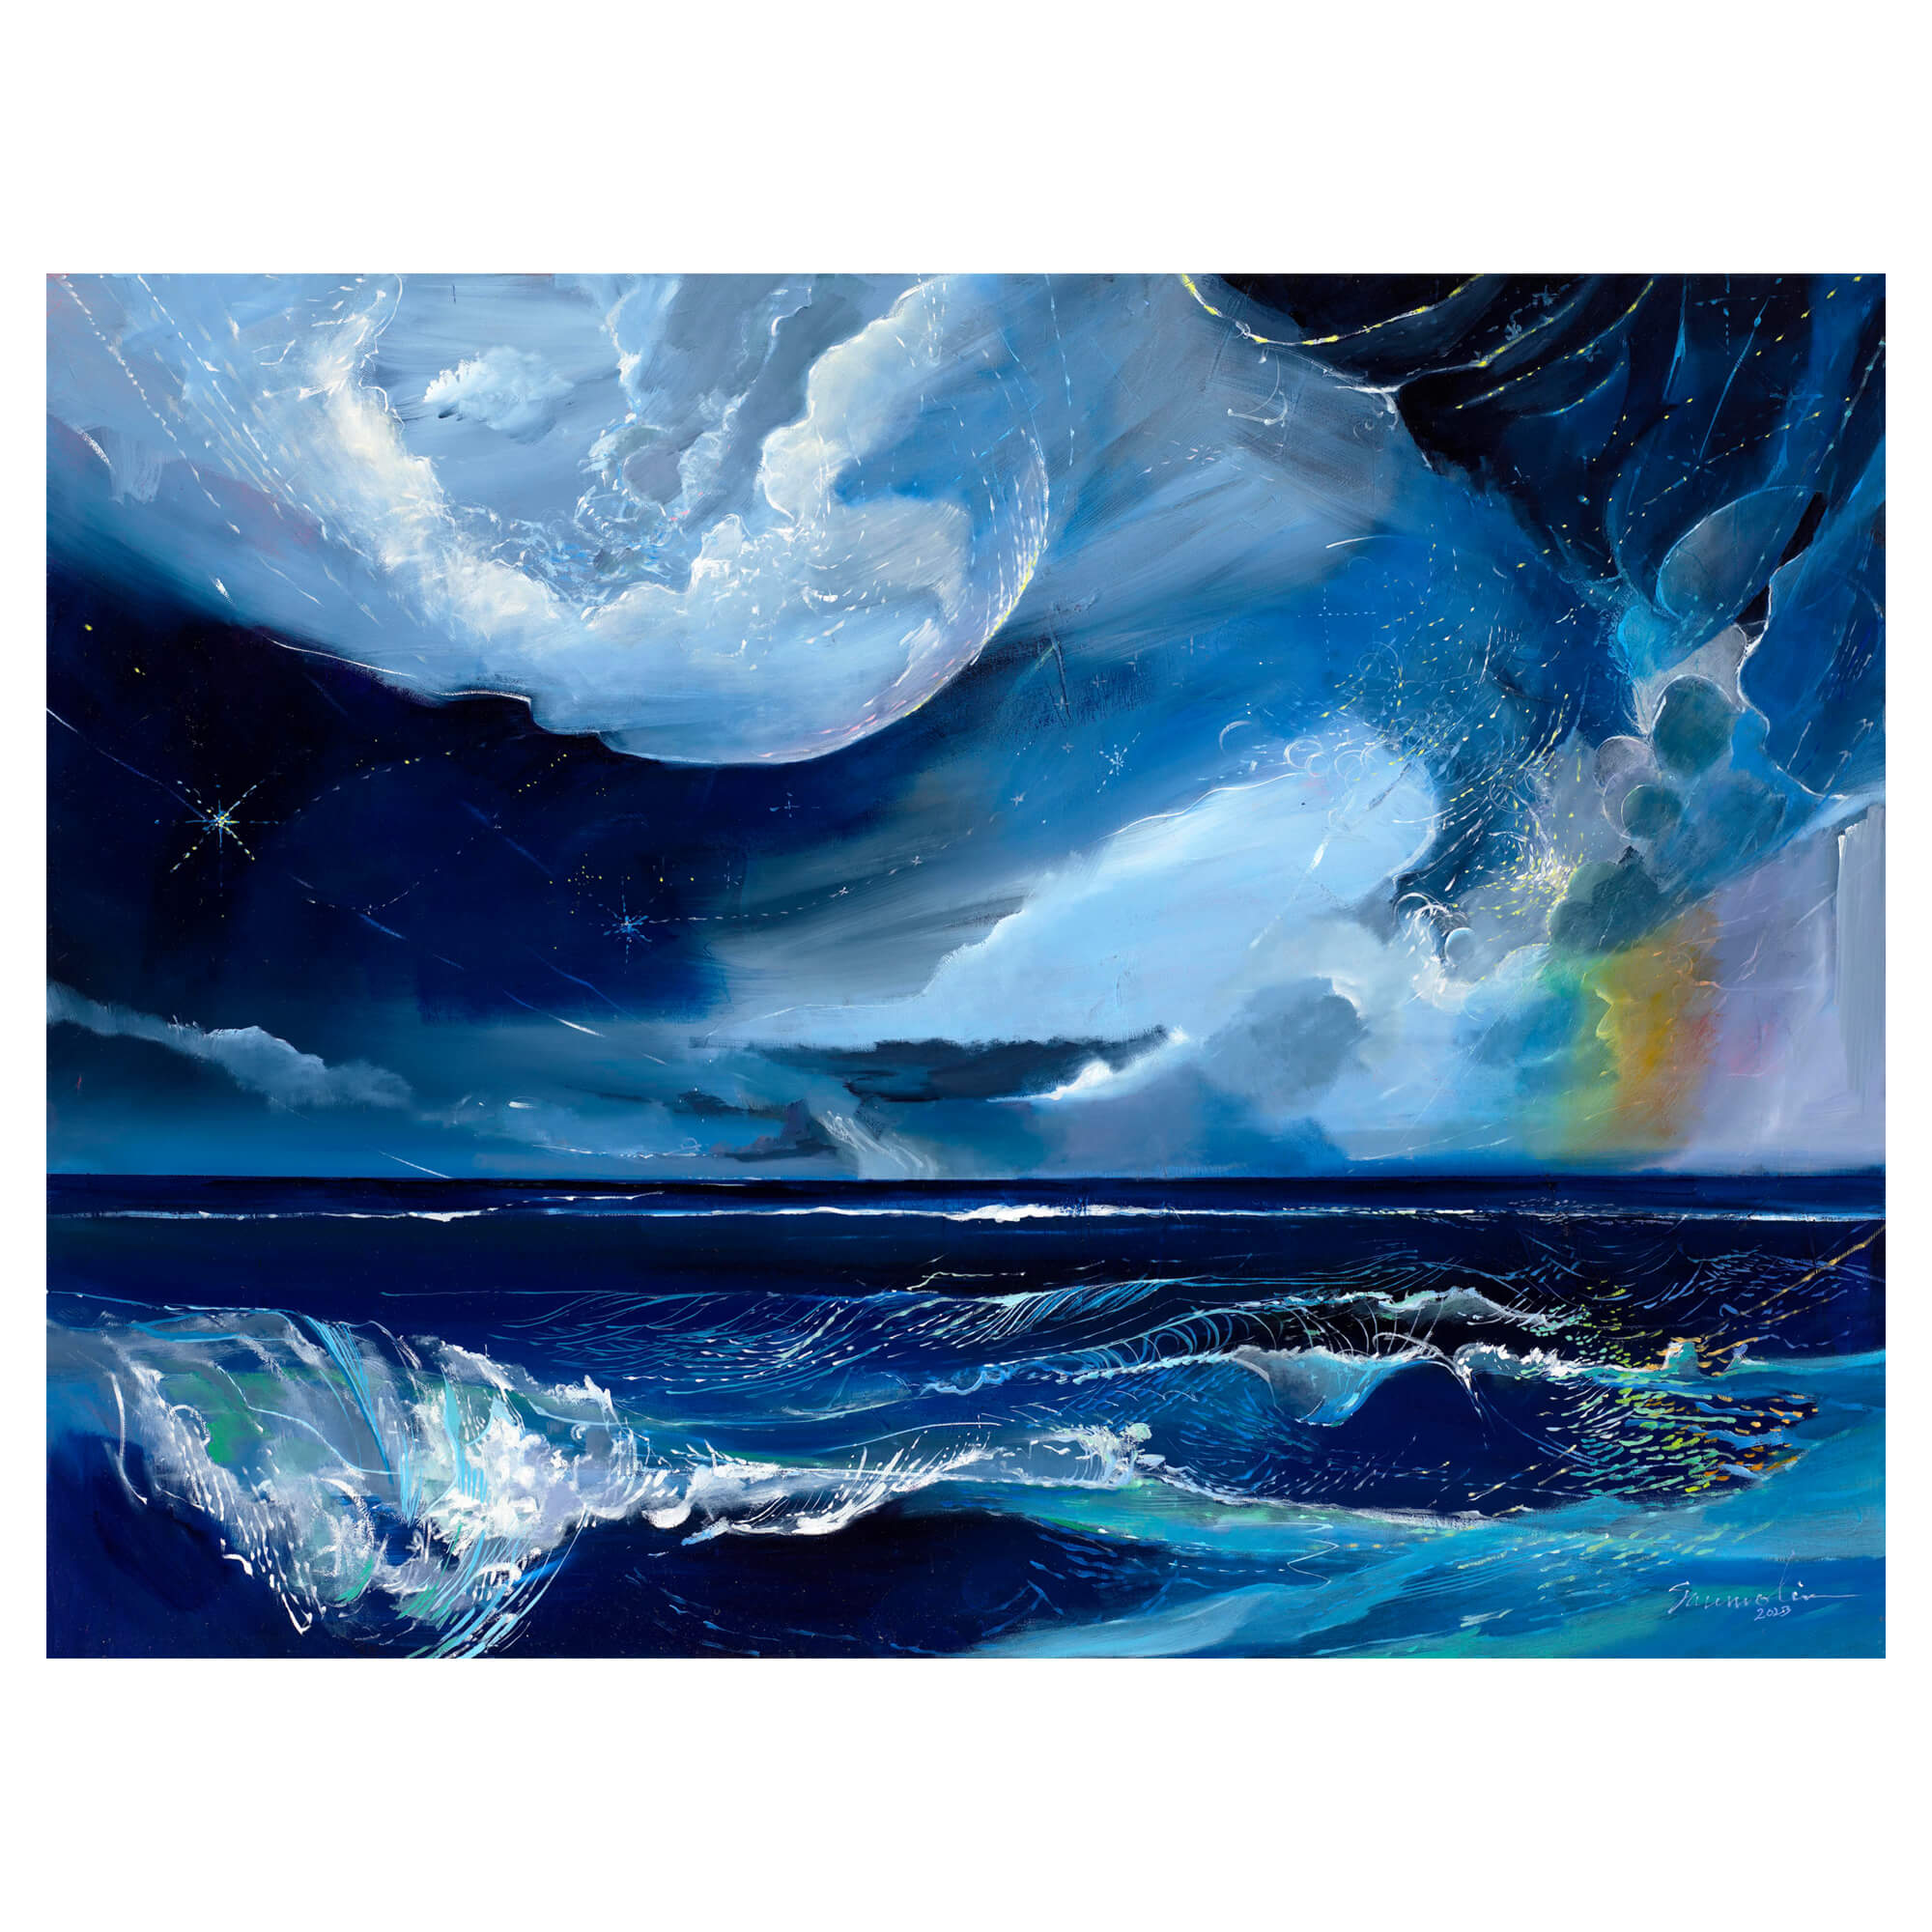 An abstract evening scene at the beach by Hawaii artist Saumolia Puapuaga